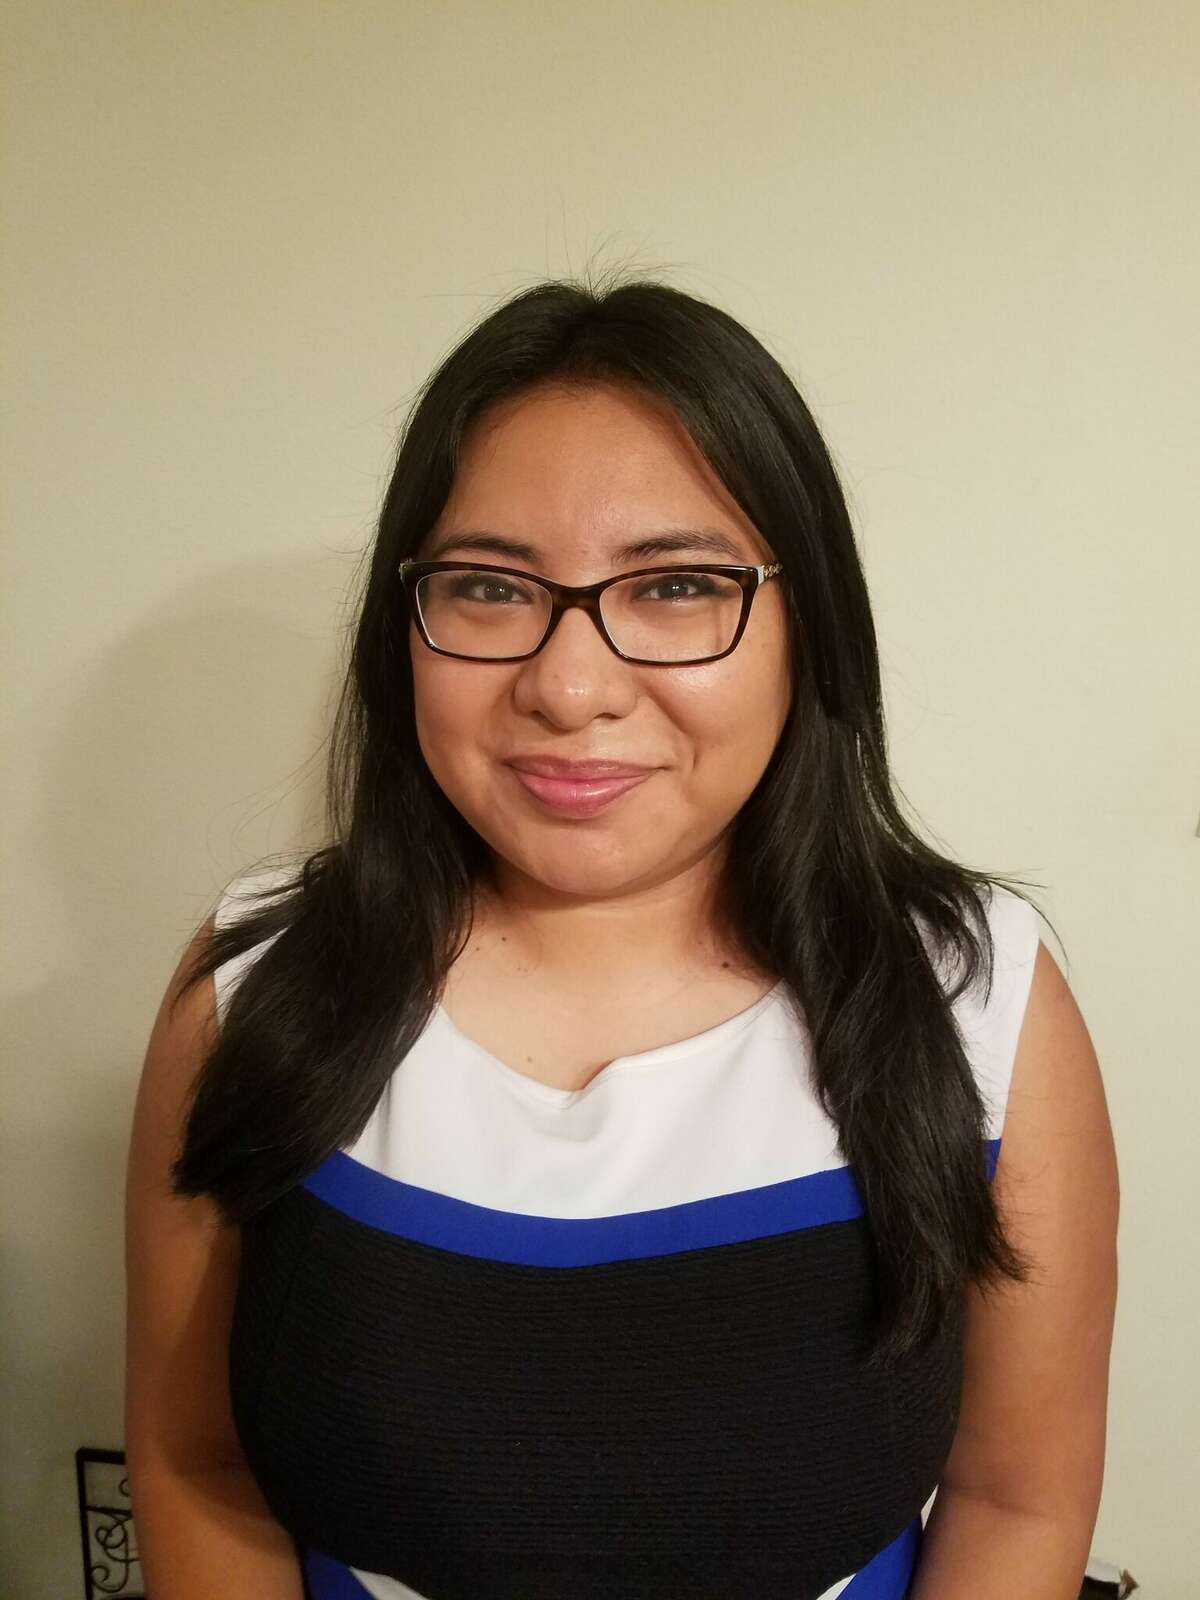 Laredo College Professor of Biology Roxanne Vargas was recently appointed by the Texas Higher Education Coordinating Board to serve a three-year term on the Texas Transfer Advisory Committee’s Discipline Specific Subcommittee on biology to aid in the development of the Texas Transfer Field of Study Curriculum for biology.